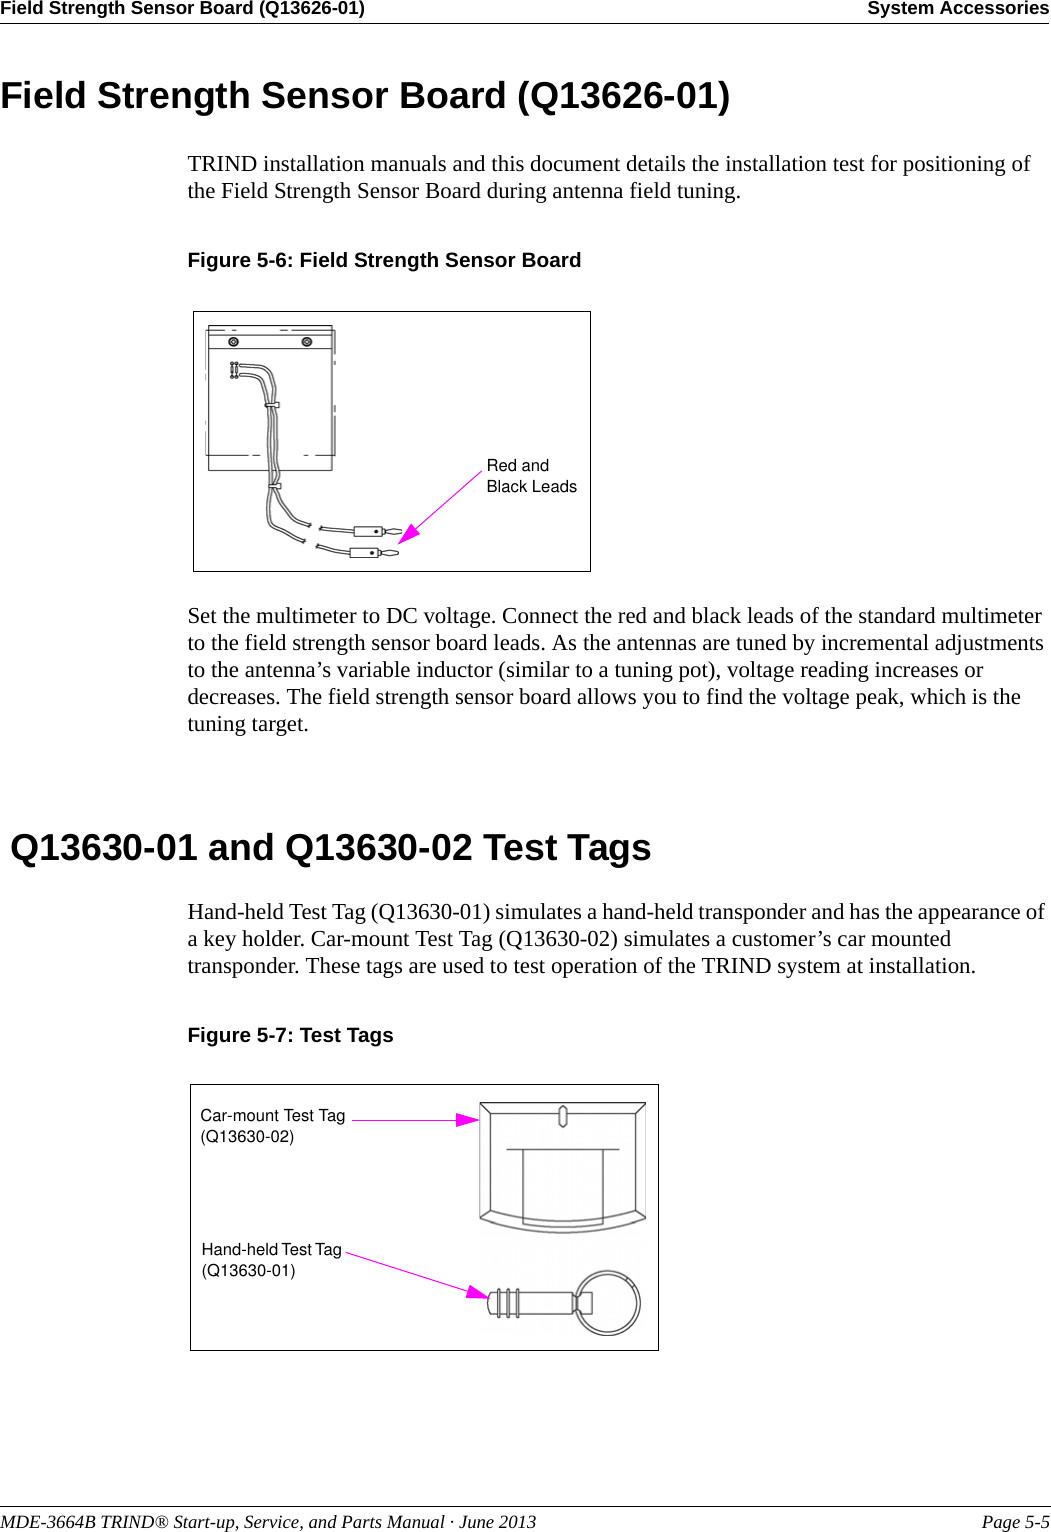 MDE-3664B TRIND® Start-up, Service, and Parts Manual · June 2013 Page 5-5Field Strength Sensor Board (Q13626-01) System AccessoriesField Strength Sensor Board (Q13626-01)TRIND installation manuals and this document details the installation test for positioning of the Field Strength Sensor Board during antenna field tuning.Figure 5-6: Field Strength Sensor Board Red and Black LeadsSet the multimeter to DC voltage. Connect the red and black leads of the standard multimeter to the field strength sensor board leads. As the antennas are tuned by incremental adjustments to the antenna’s variable inductor (similar to a tuning pot), voltage reading increases or decreases. The field strength sensor board allows you to find the voltage peak, which is the tuning target. Q13630-01 and Q13630-02 Test TagsHand-held Test Tag (Q13630-01) simulates a hand-held transponder and has the appearance of a key holder. Car-mount Test Tag (Q13630-02) simulates a customer’s car mounted transponder. These tags are used to test operation of the TRIND system at installation.Figure 5-7: Test TagsCar-mount Test Tag (Q13630-02)Hand-held Test Tag (Q13630-01)